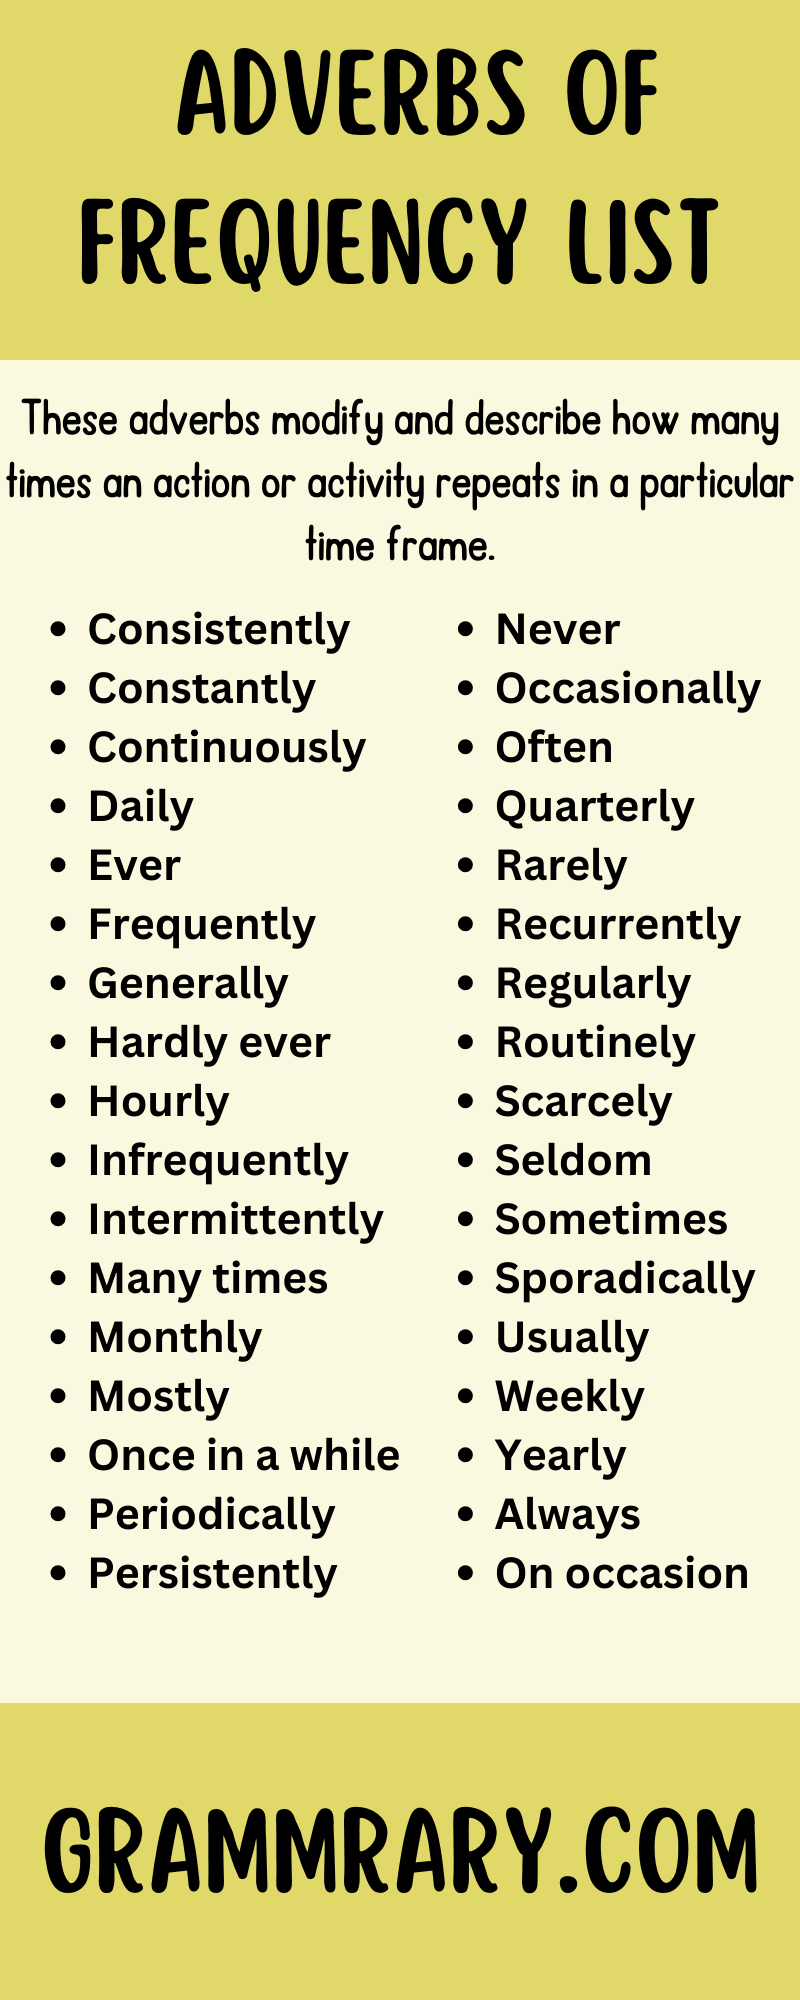 Adverbs of Frequency List